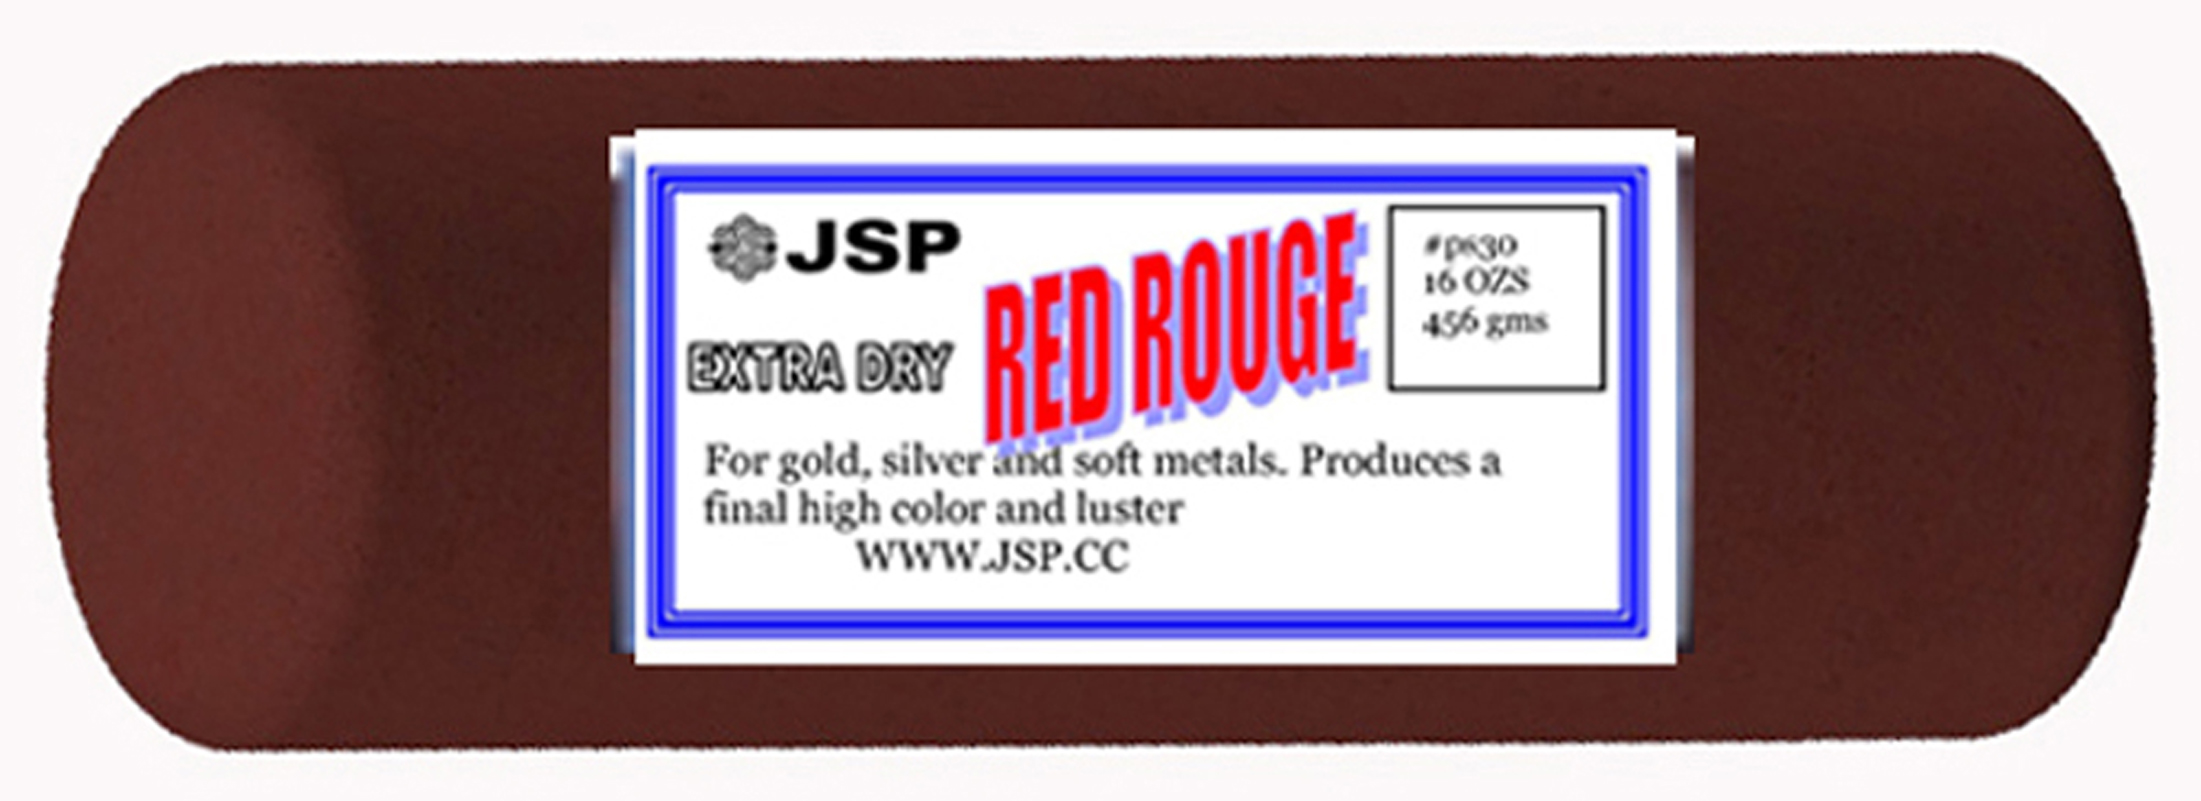 RED ROUGE BAR ROLLED ROUND 1 LB - Click Image to Close